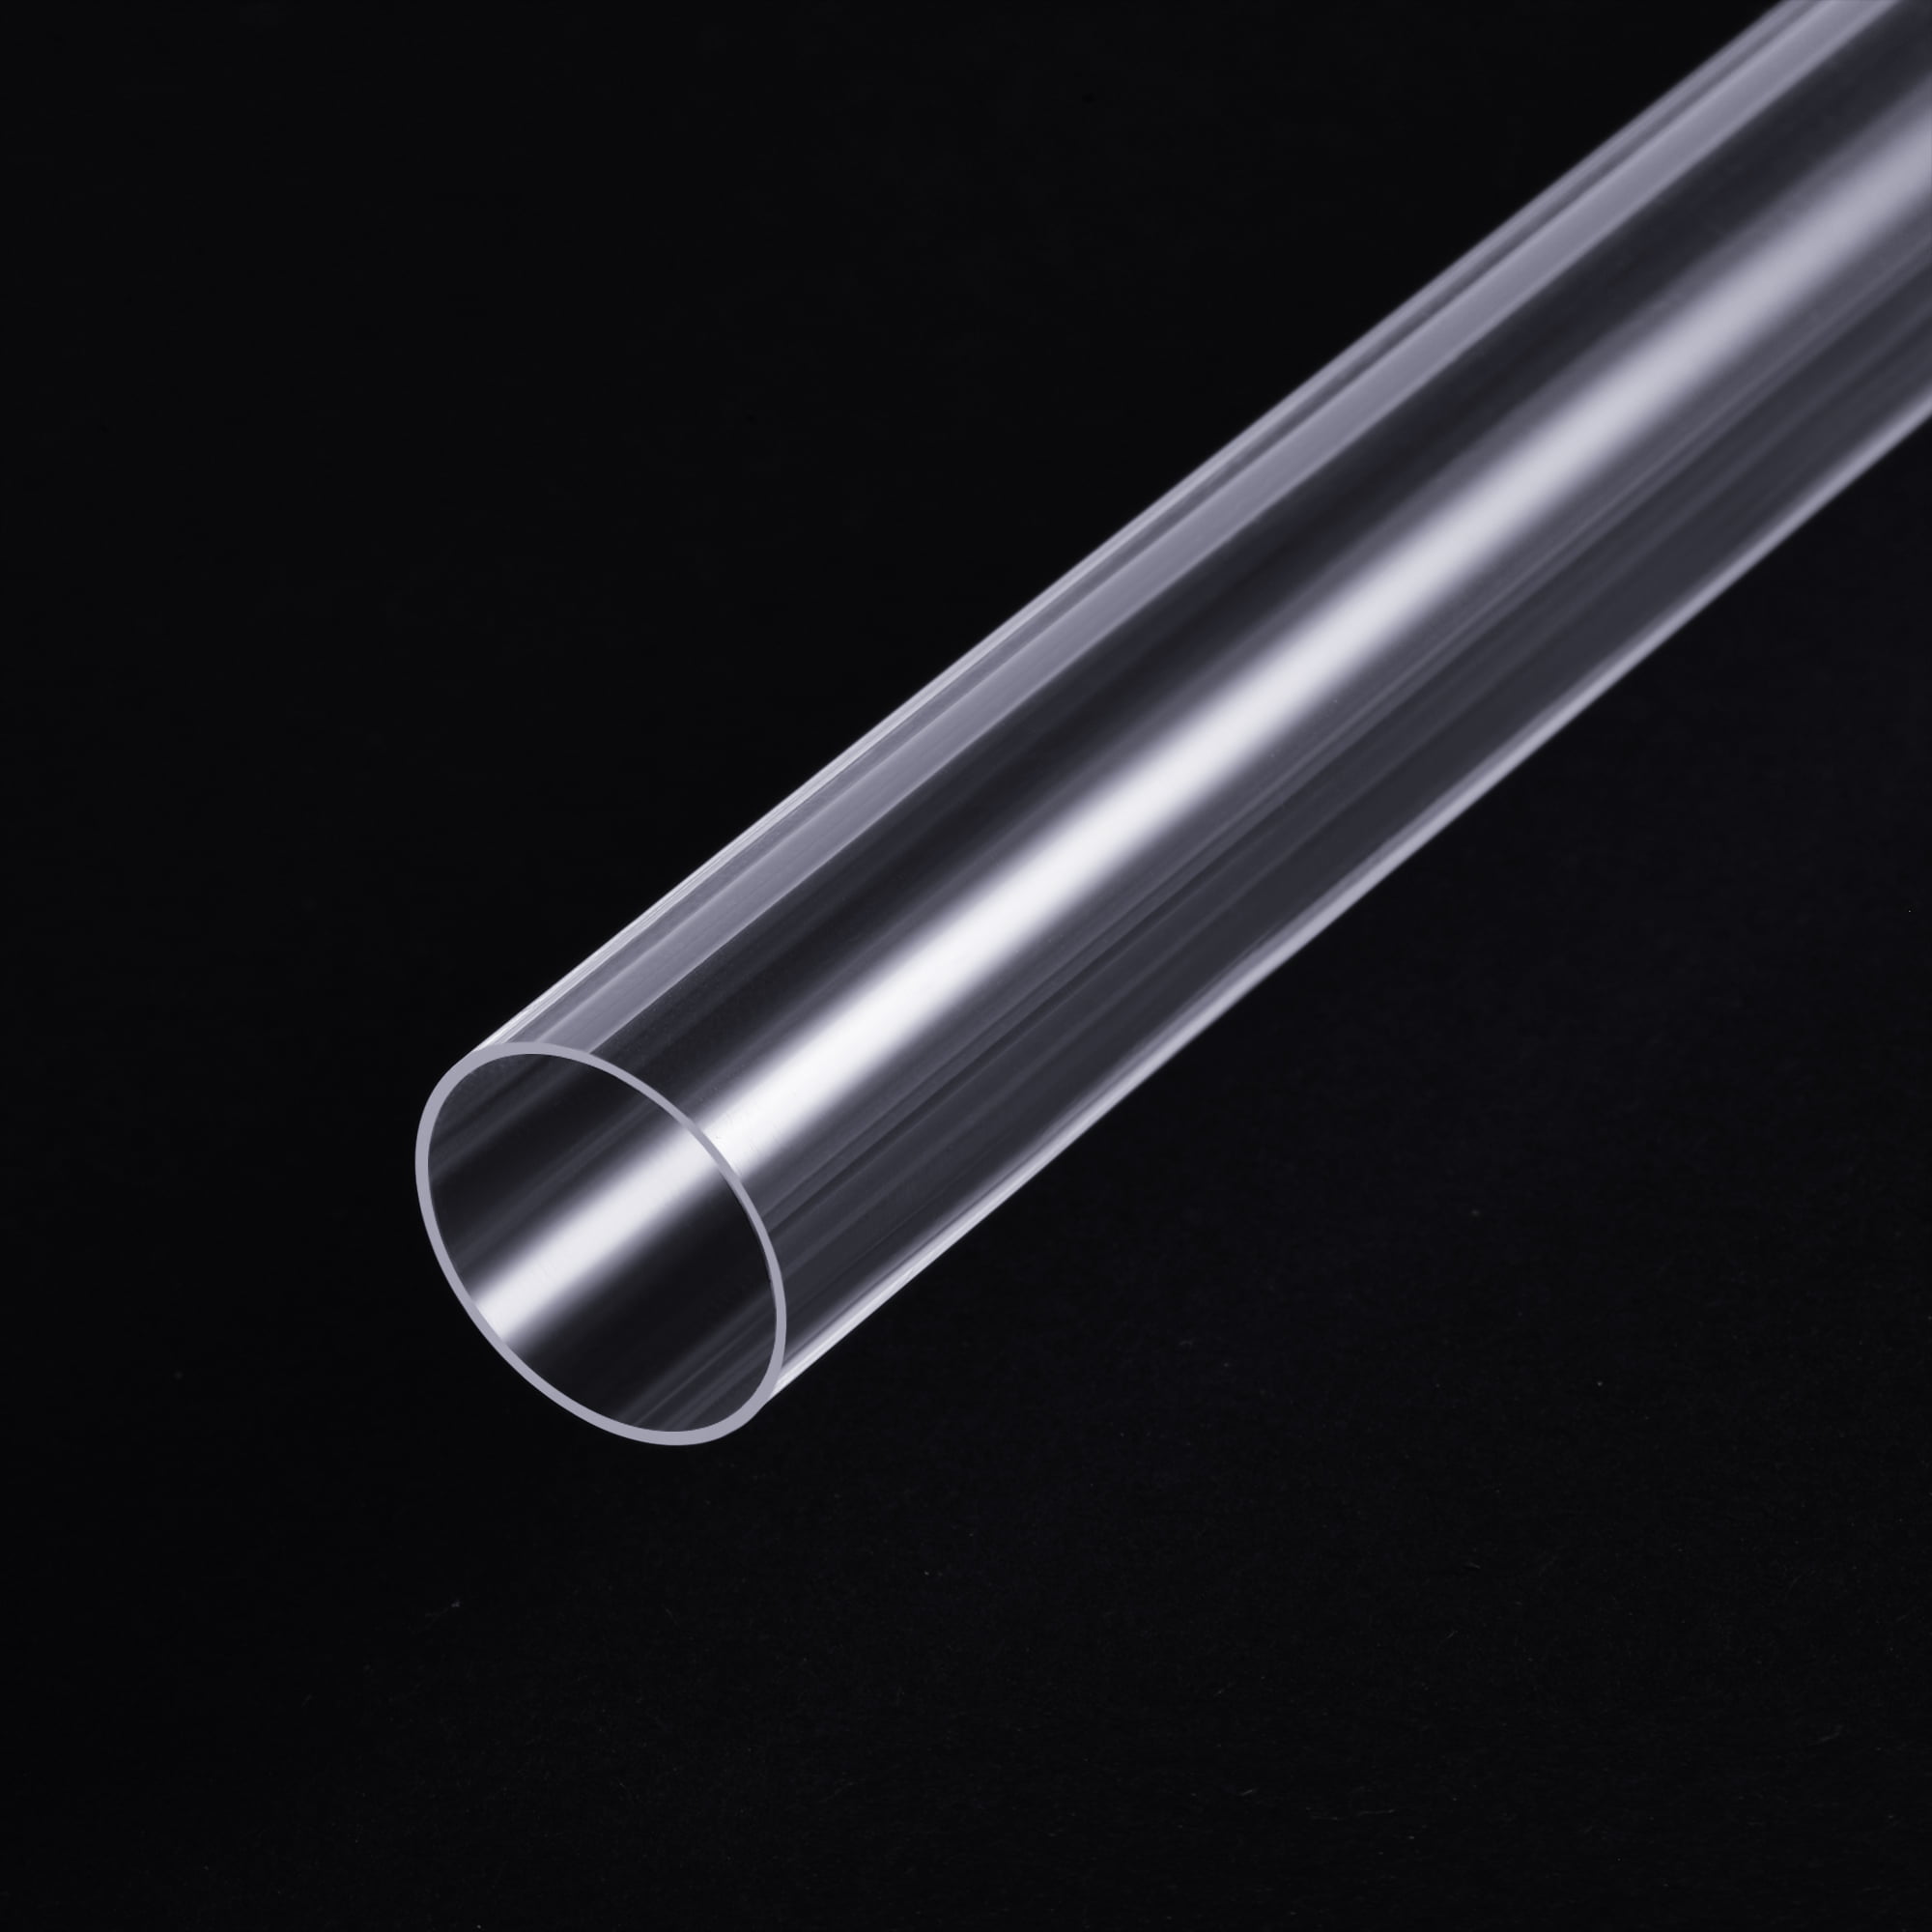 ID x 1/2" Details about   2pcs Clear Rigid PVC Pipe 15/32" 12mm 13mm 0.02" Wall Tube x 2ft 